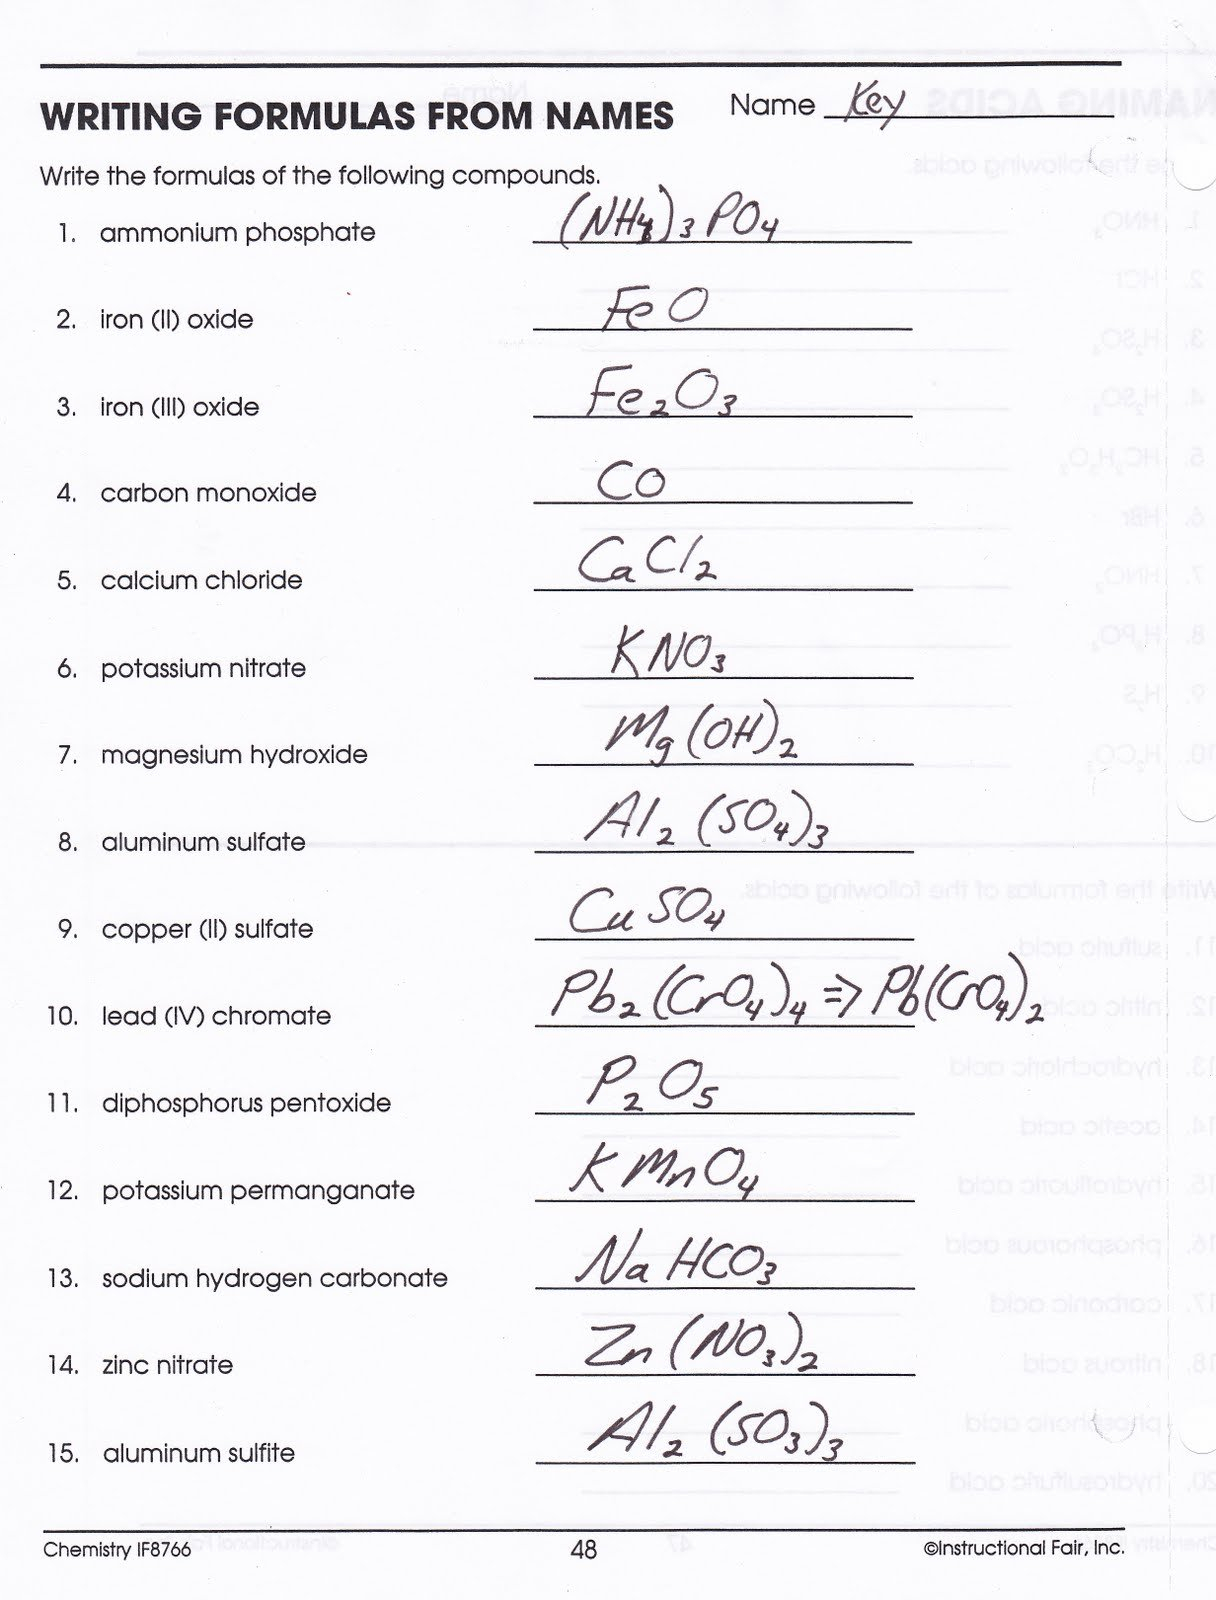 Chemical Names And Formulas Worksheet Answers Electron Configuration With Chemical Names And Formulas Worksheet Answers